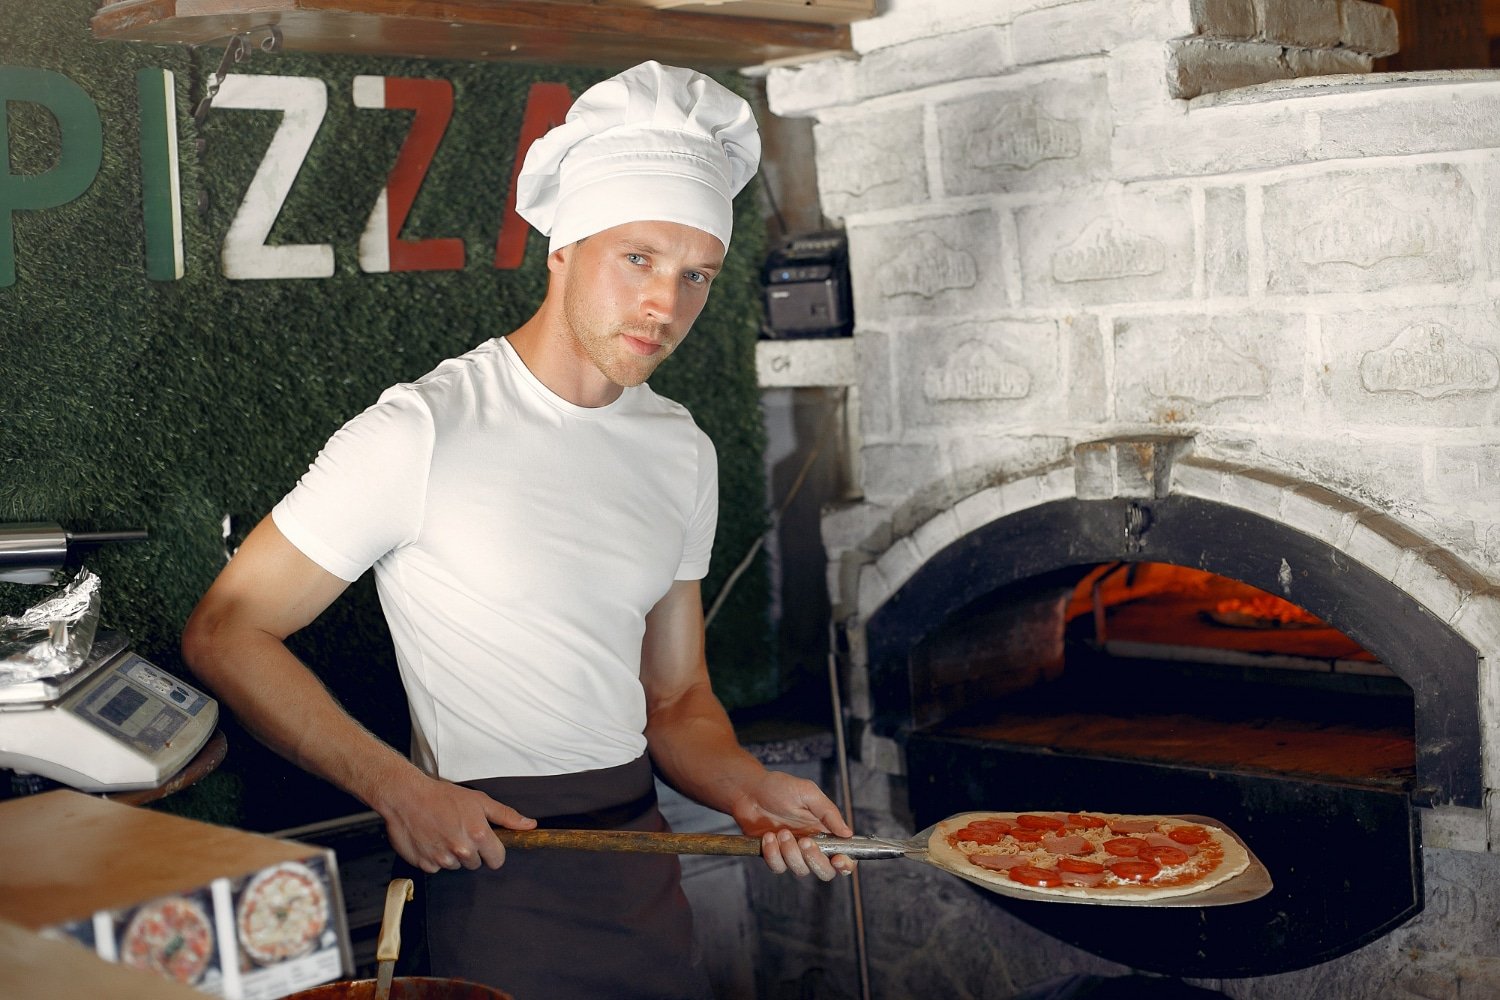 Master The Art Of Pizza Making With Ooni’s High-Performance Pizza Ovens